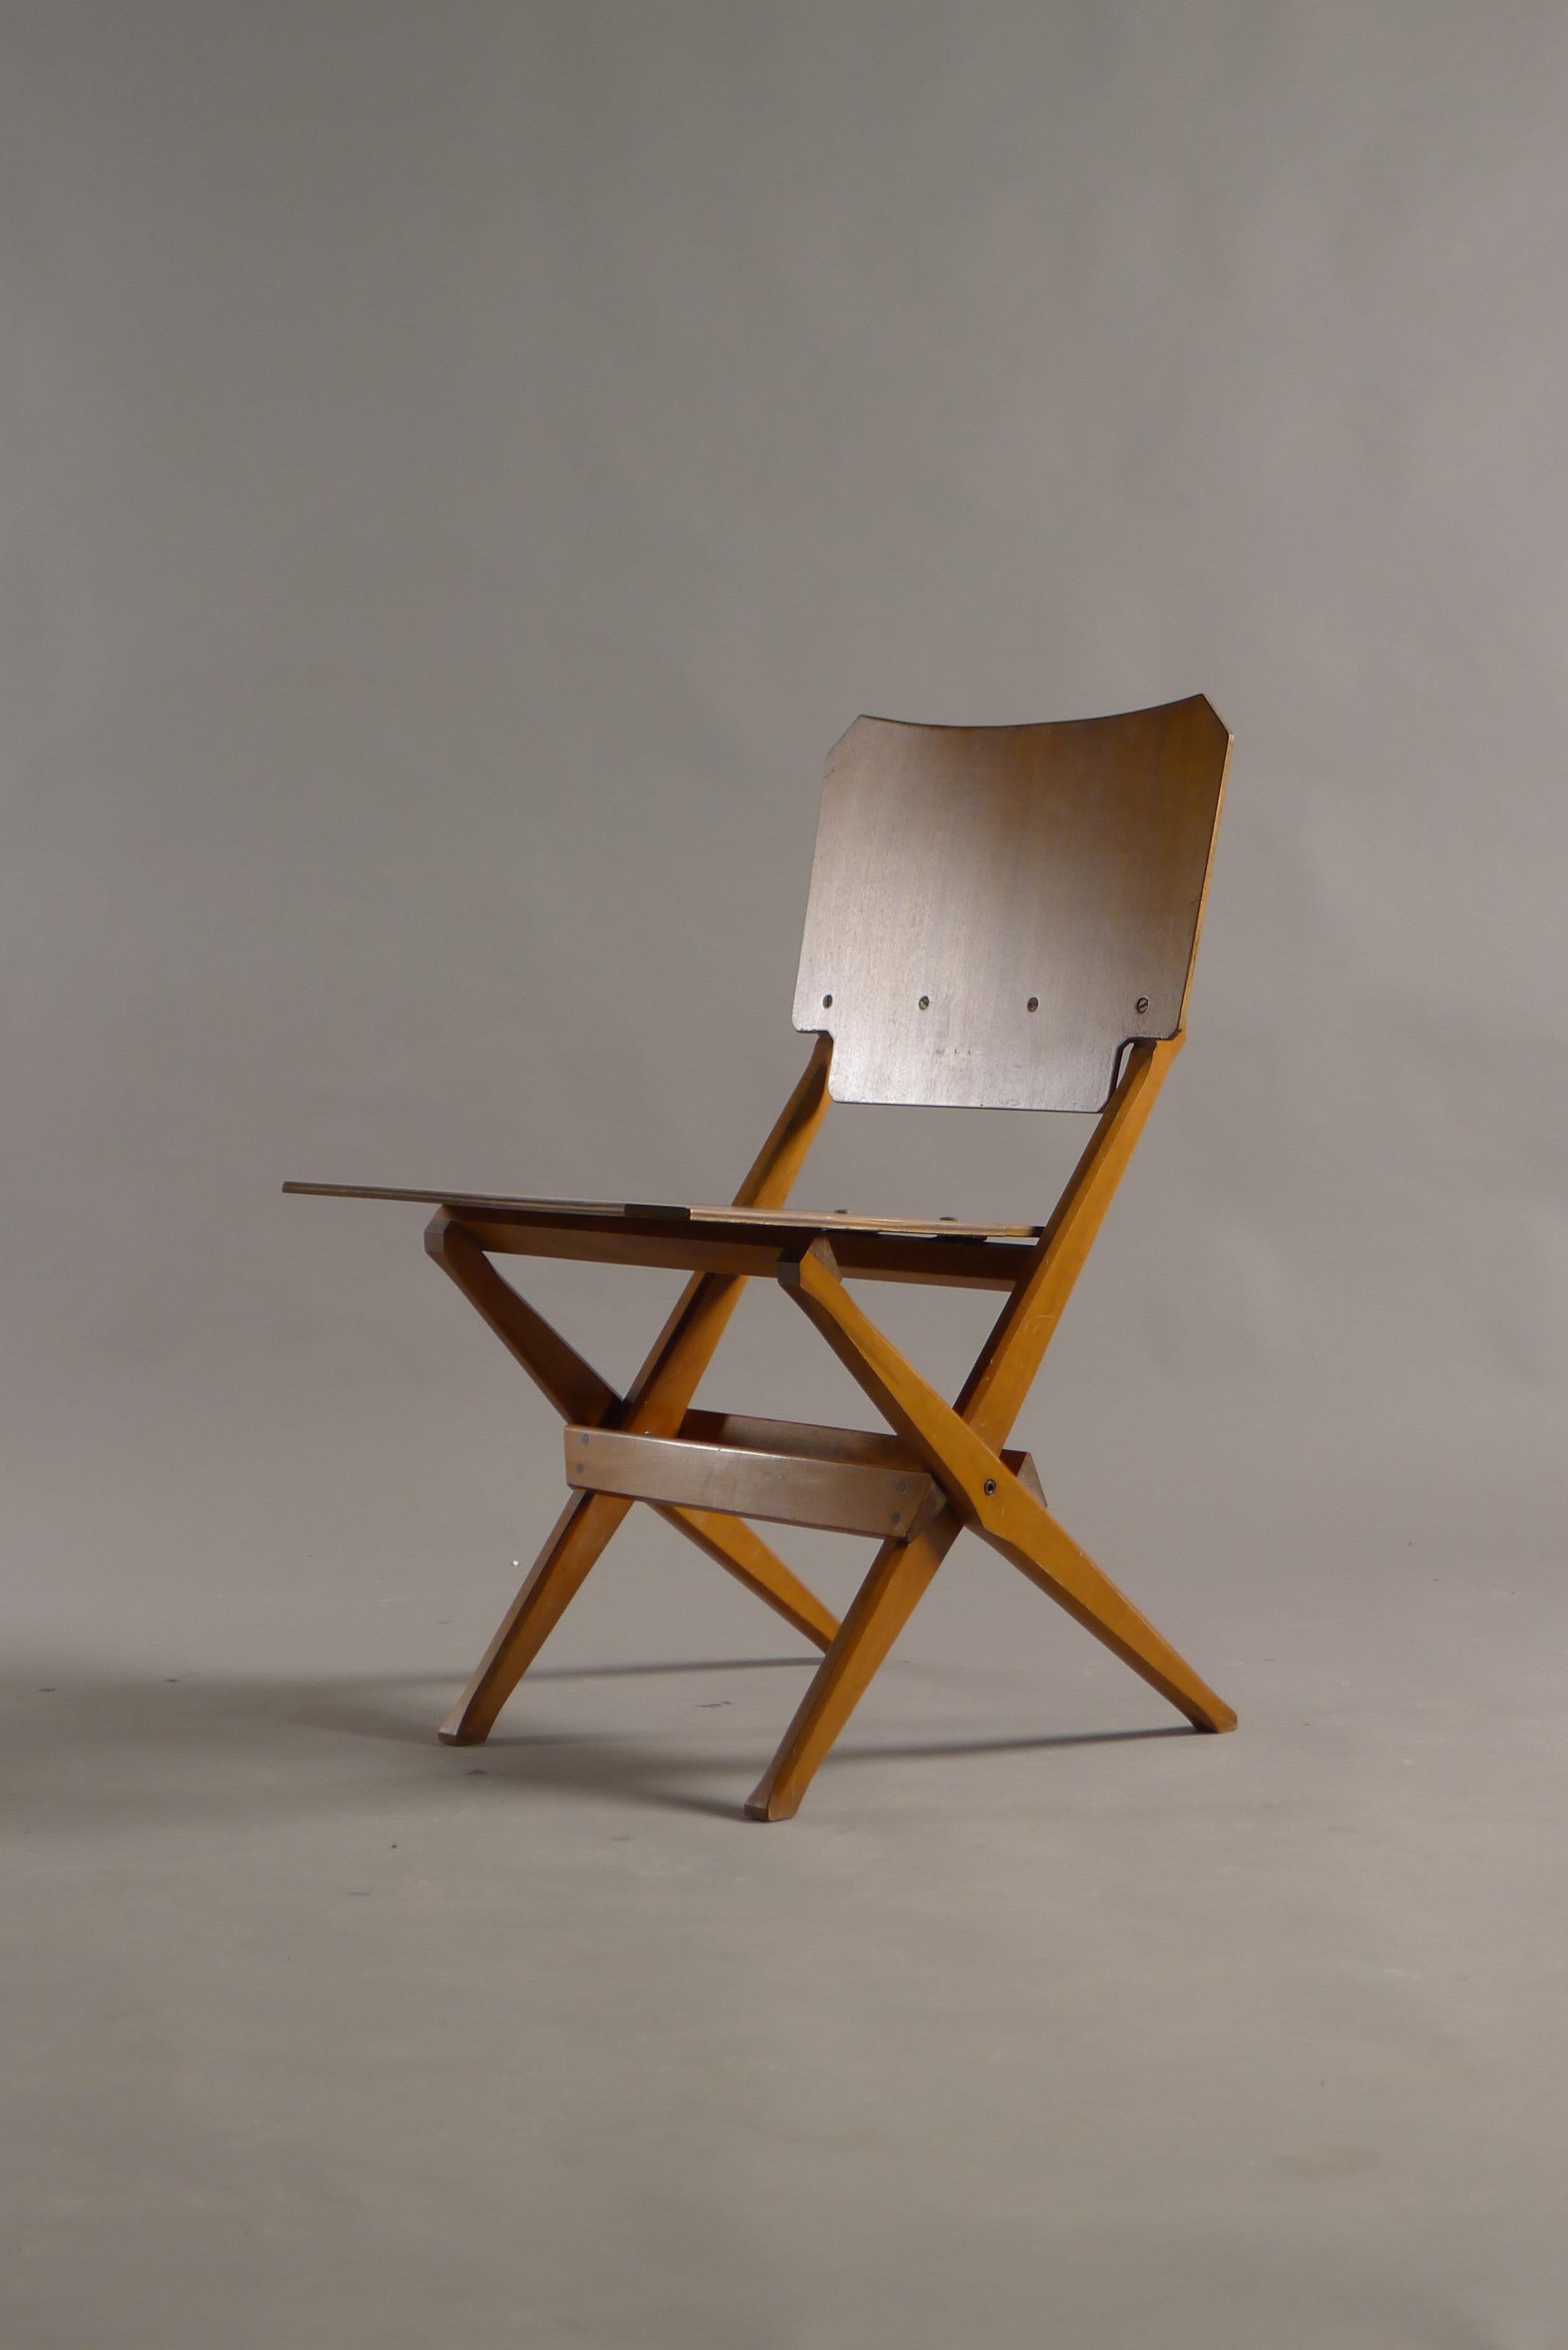 Franco Albini for Poggi, Italy, circa 1950. A folding chair of wooden construction in completely original untouched vintage condition. 

Mechanism works perfectly. 

A rarely seen chair of outstanding design.